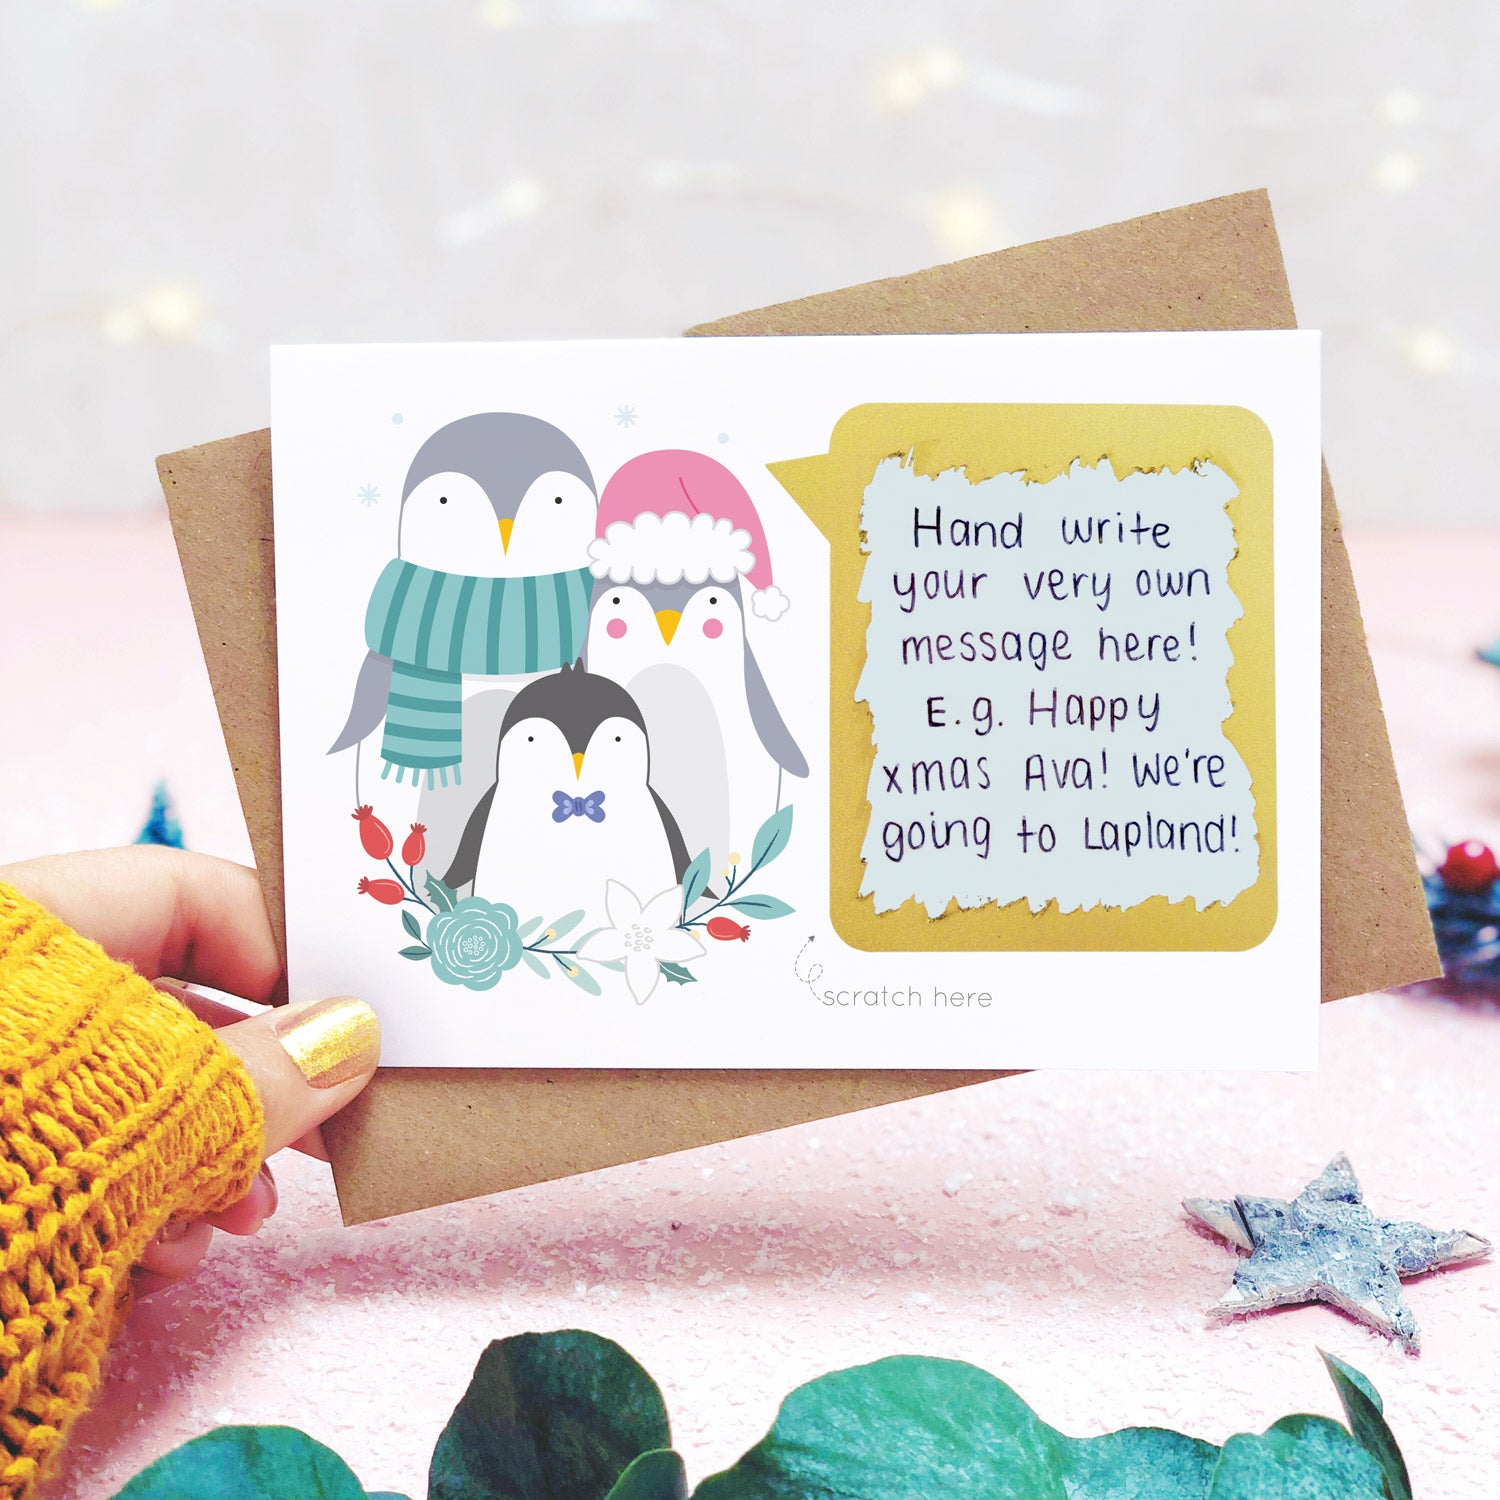 A personalised penguin family scratch card shot in a lifestyle setting with a pink background being held behind a sprig of eucalyptus and festive props. The scratch panel has been scratched off to reveal the hidden message.